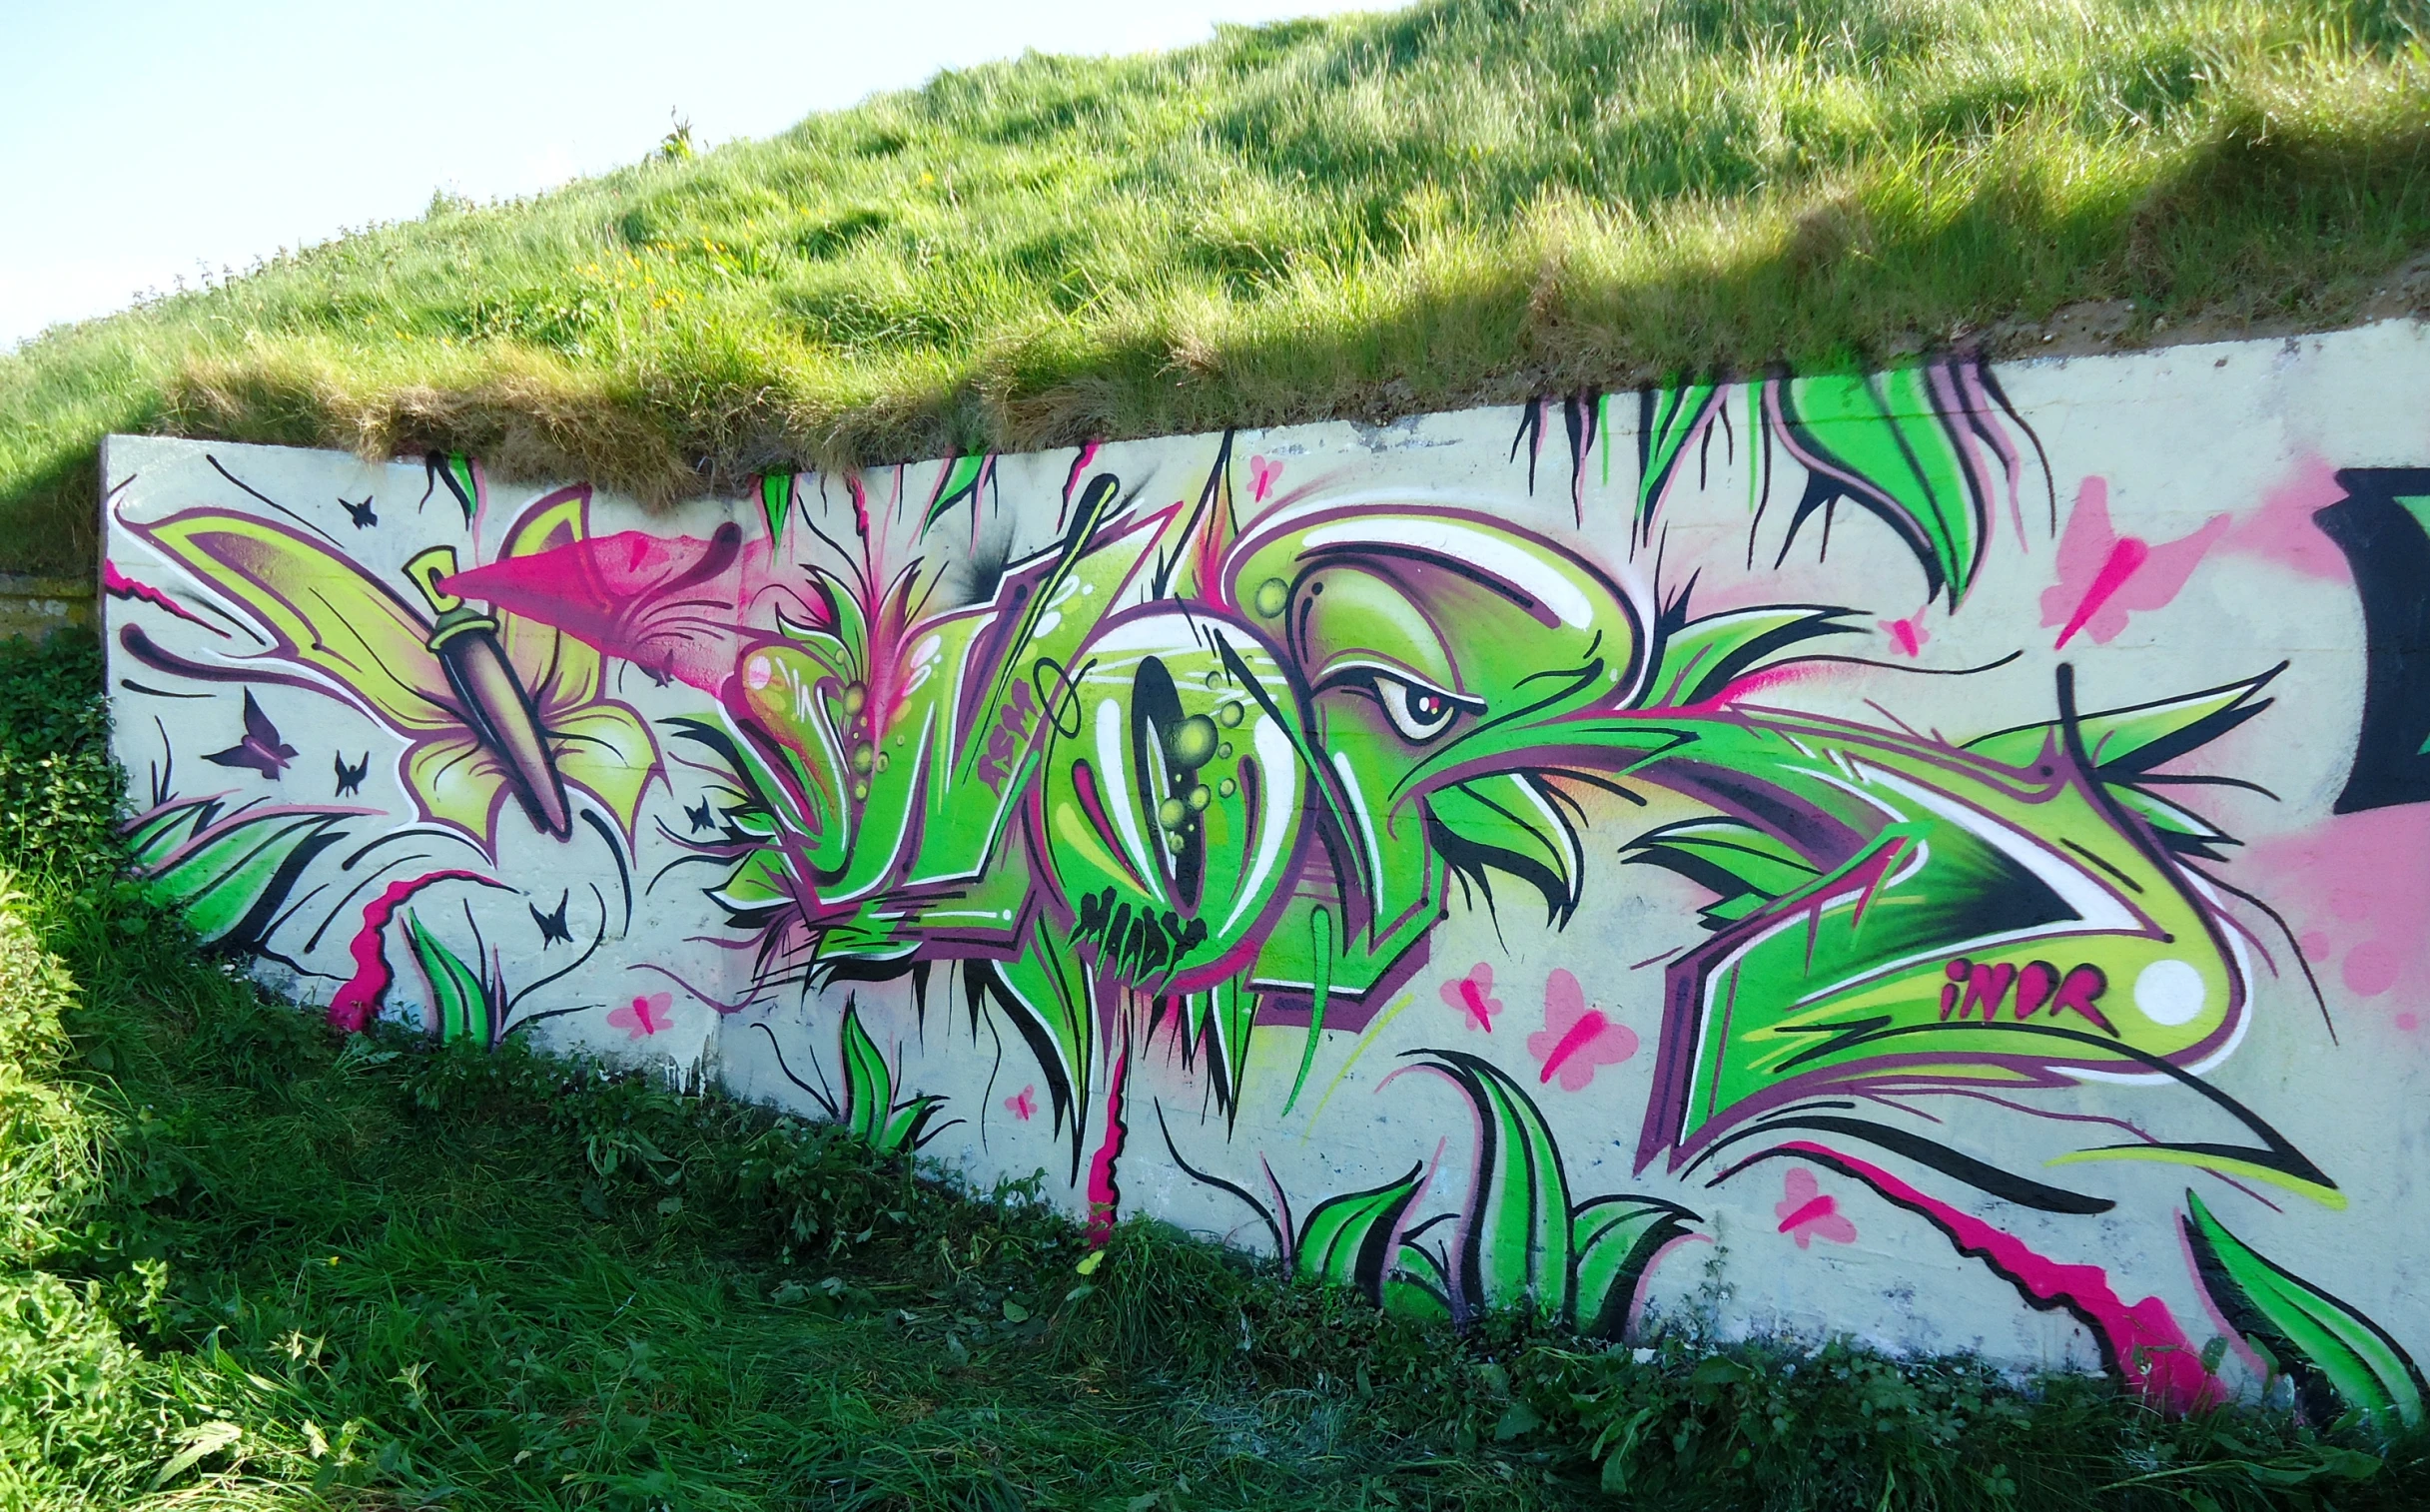 green, pink and purple graffiti is drawn on the wall